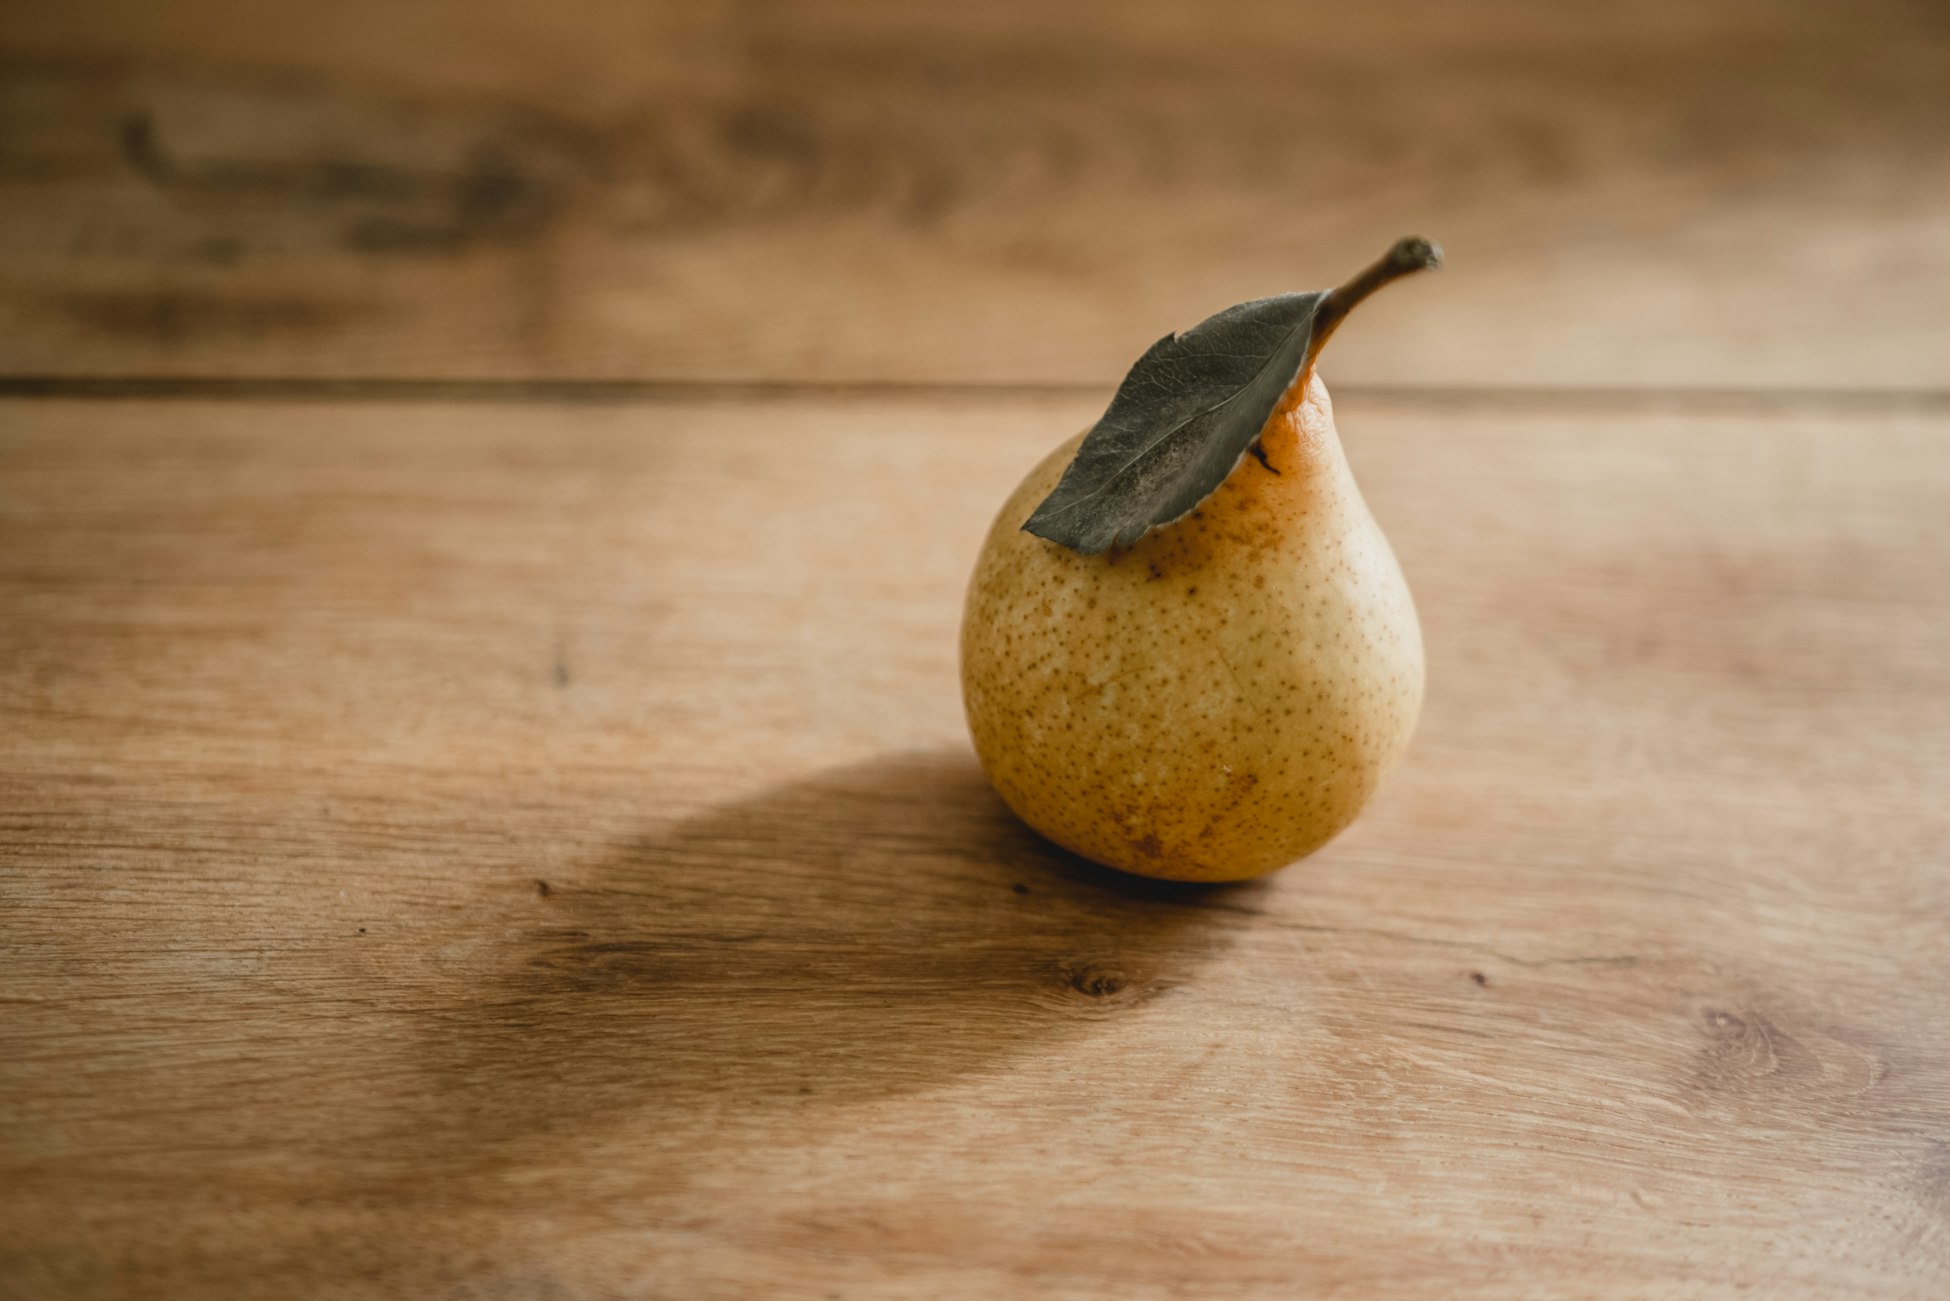 Are dried fruits pears for constipation?